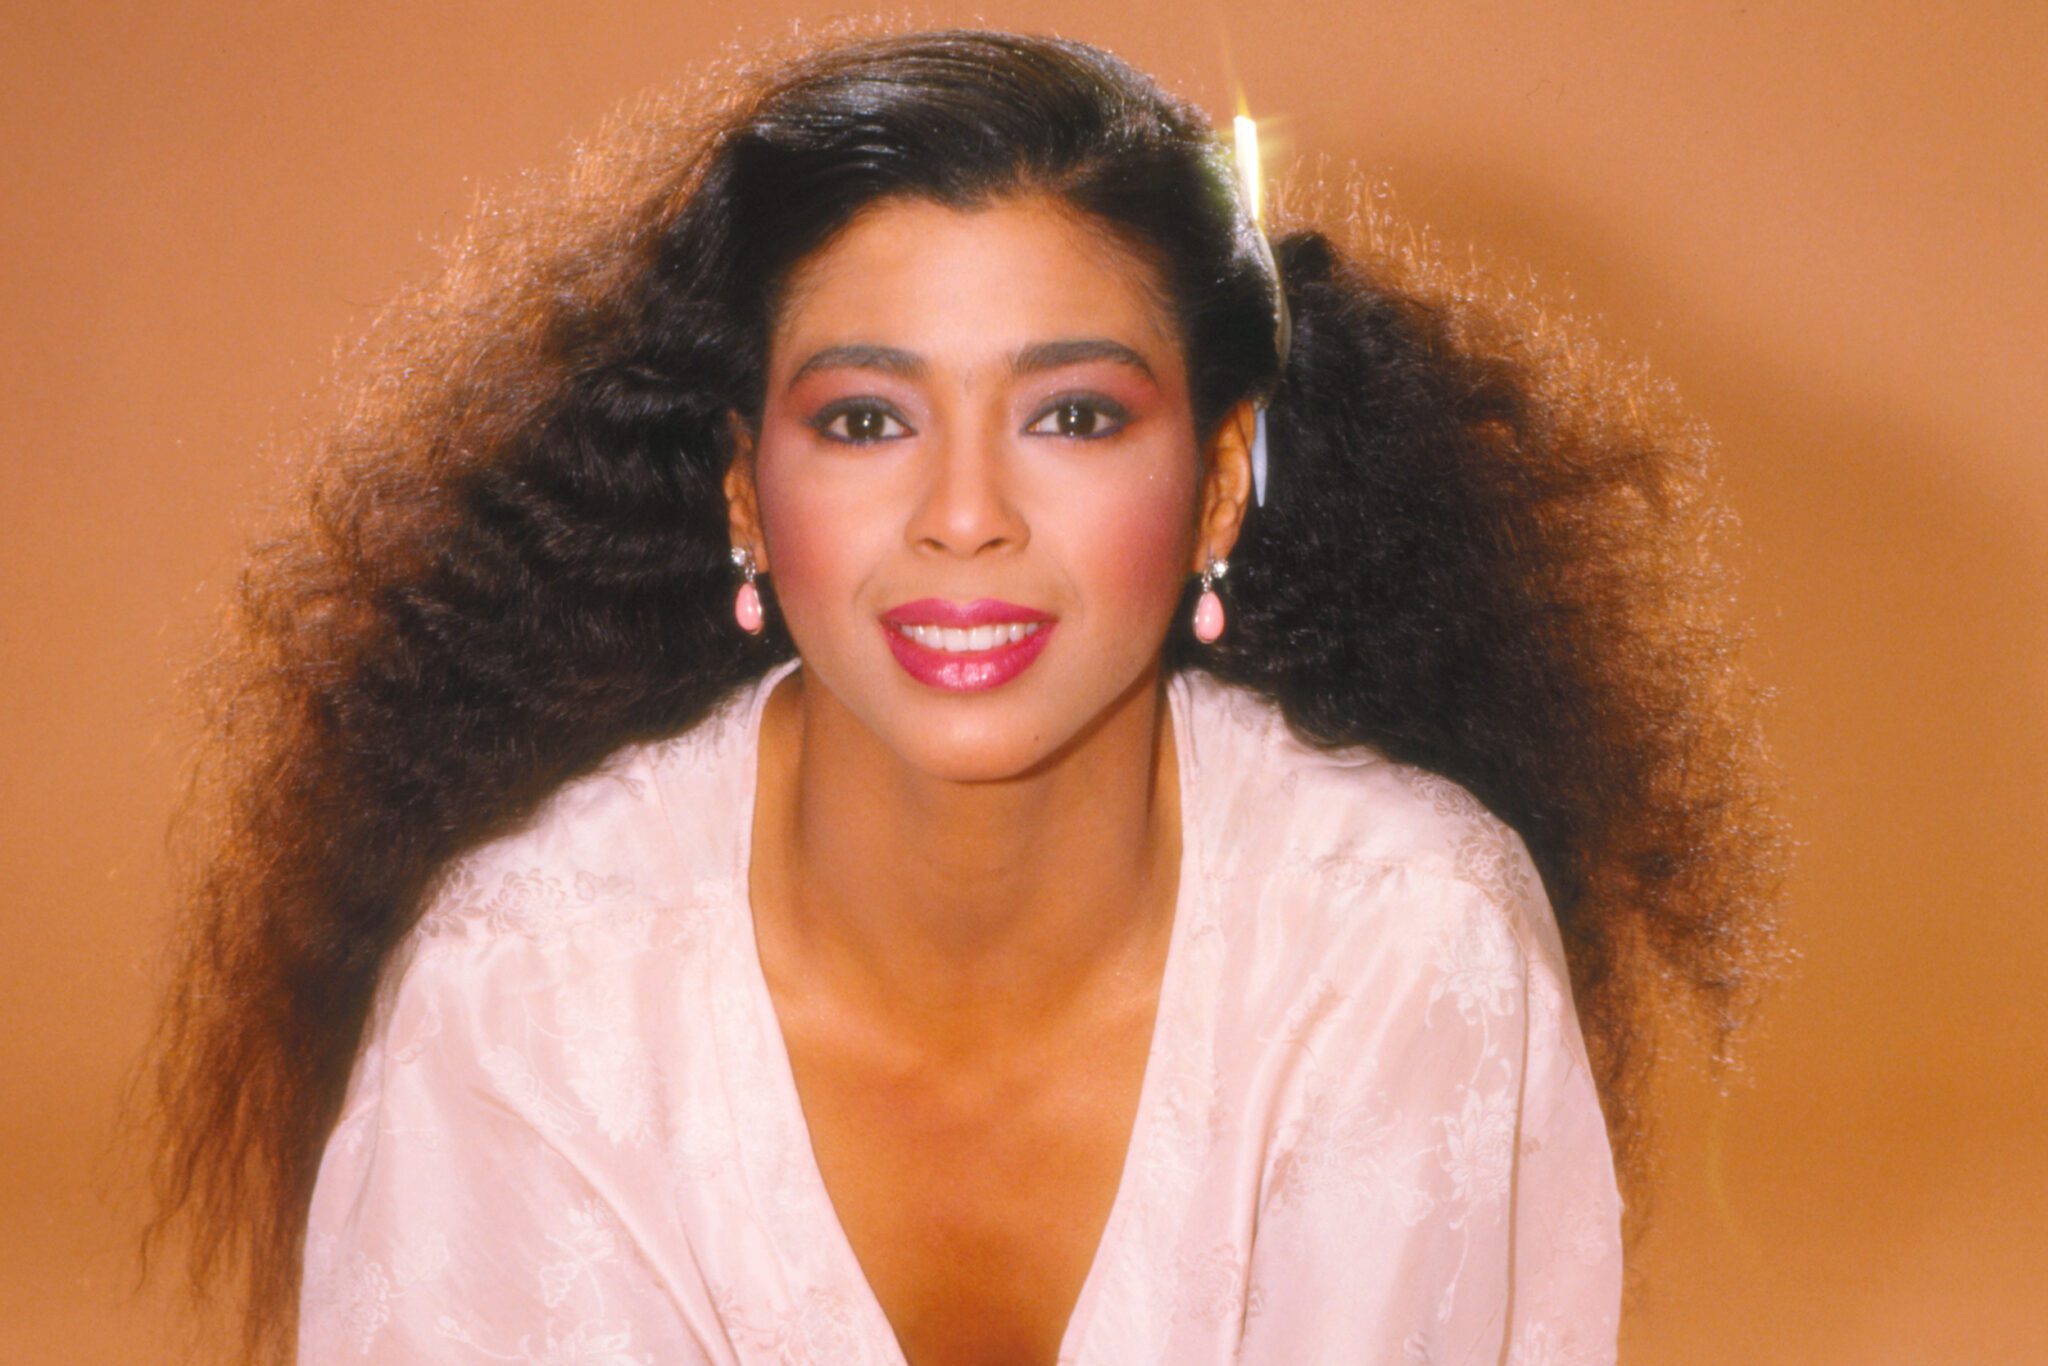 Irene Cara Net Worth The Fame and Flashdance Singer's Wealth Revealed